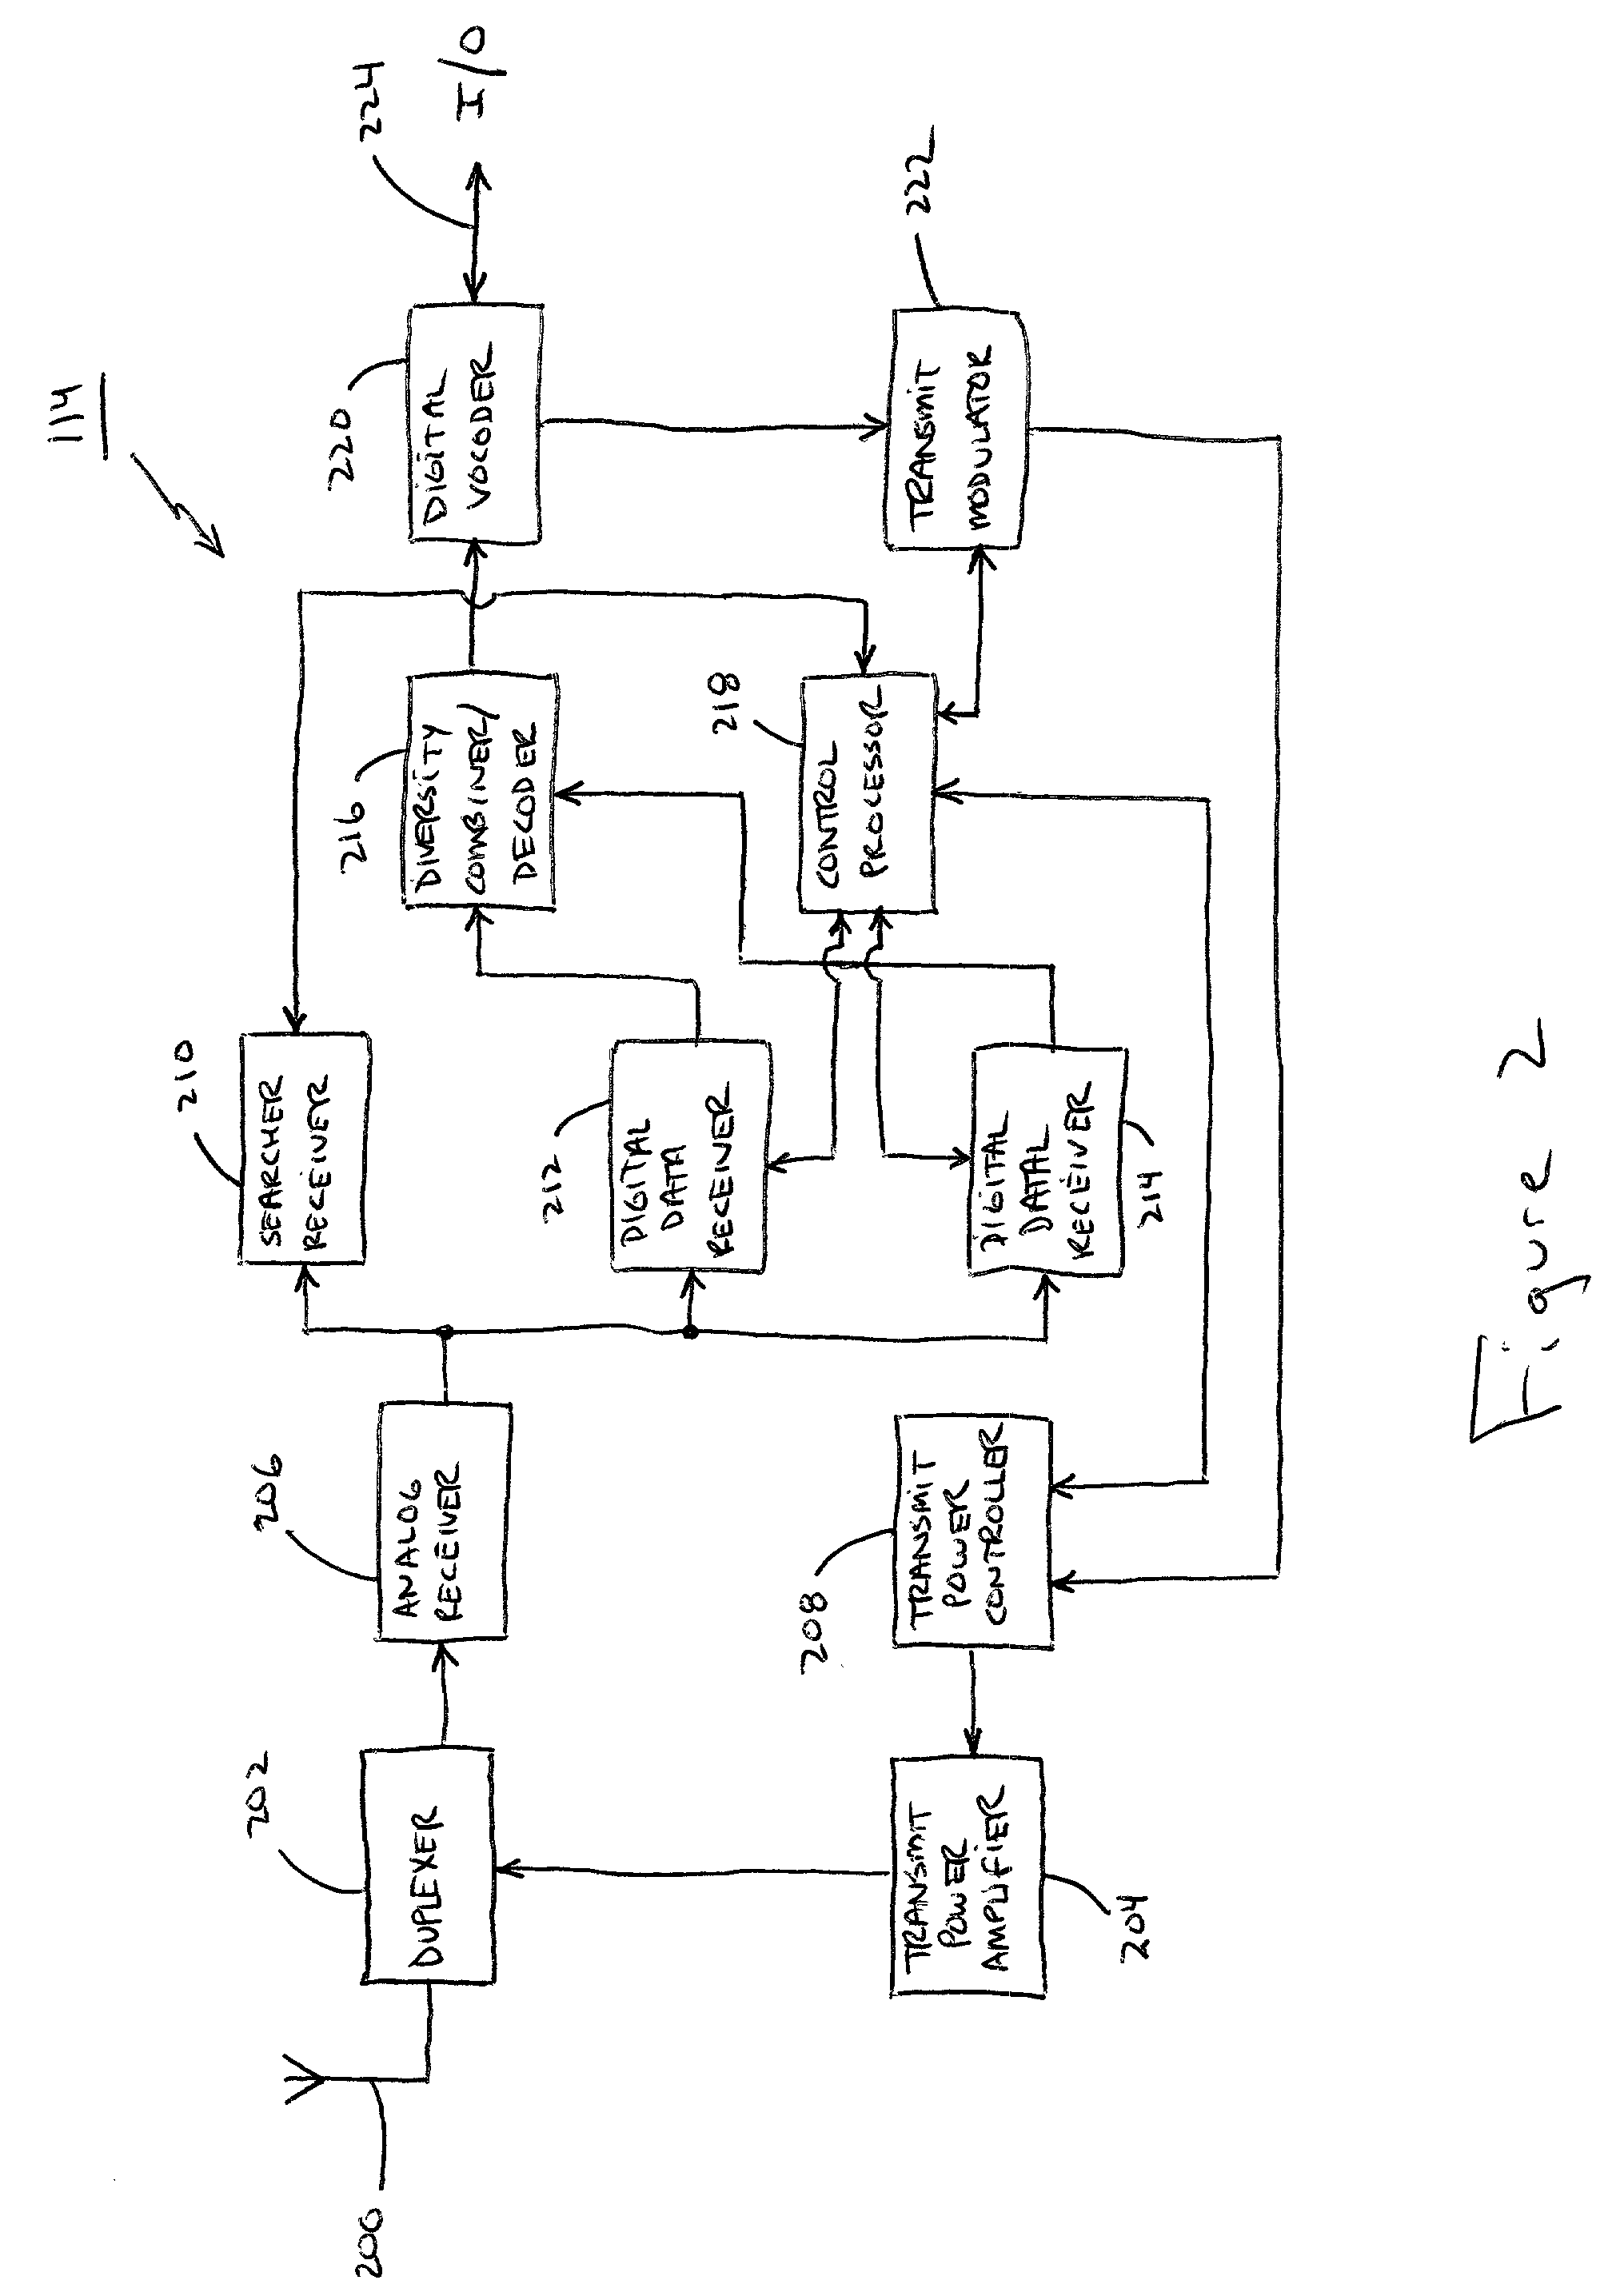 Technique for improving open loop power control in spread spectrum telecommunications systems